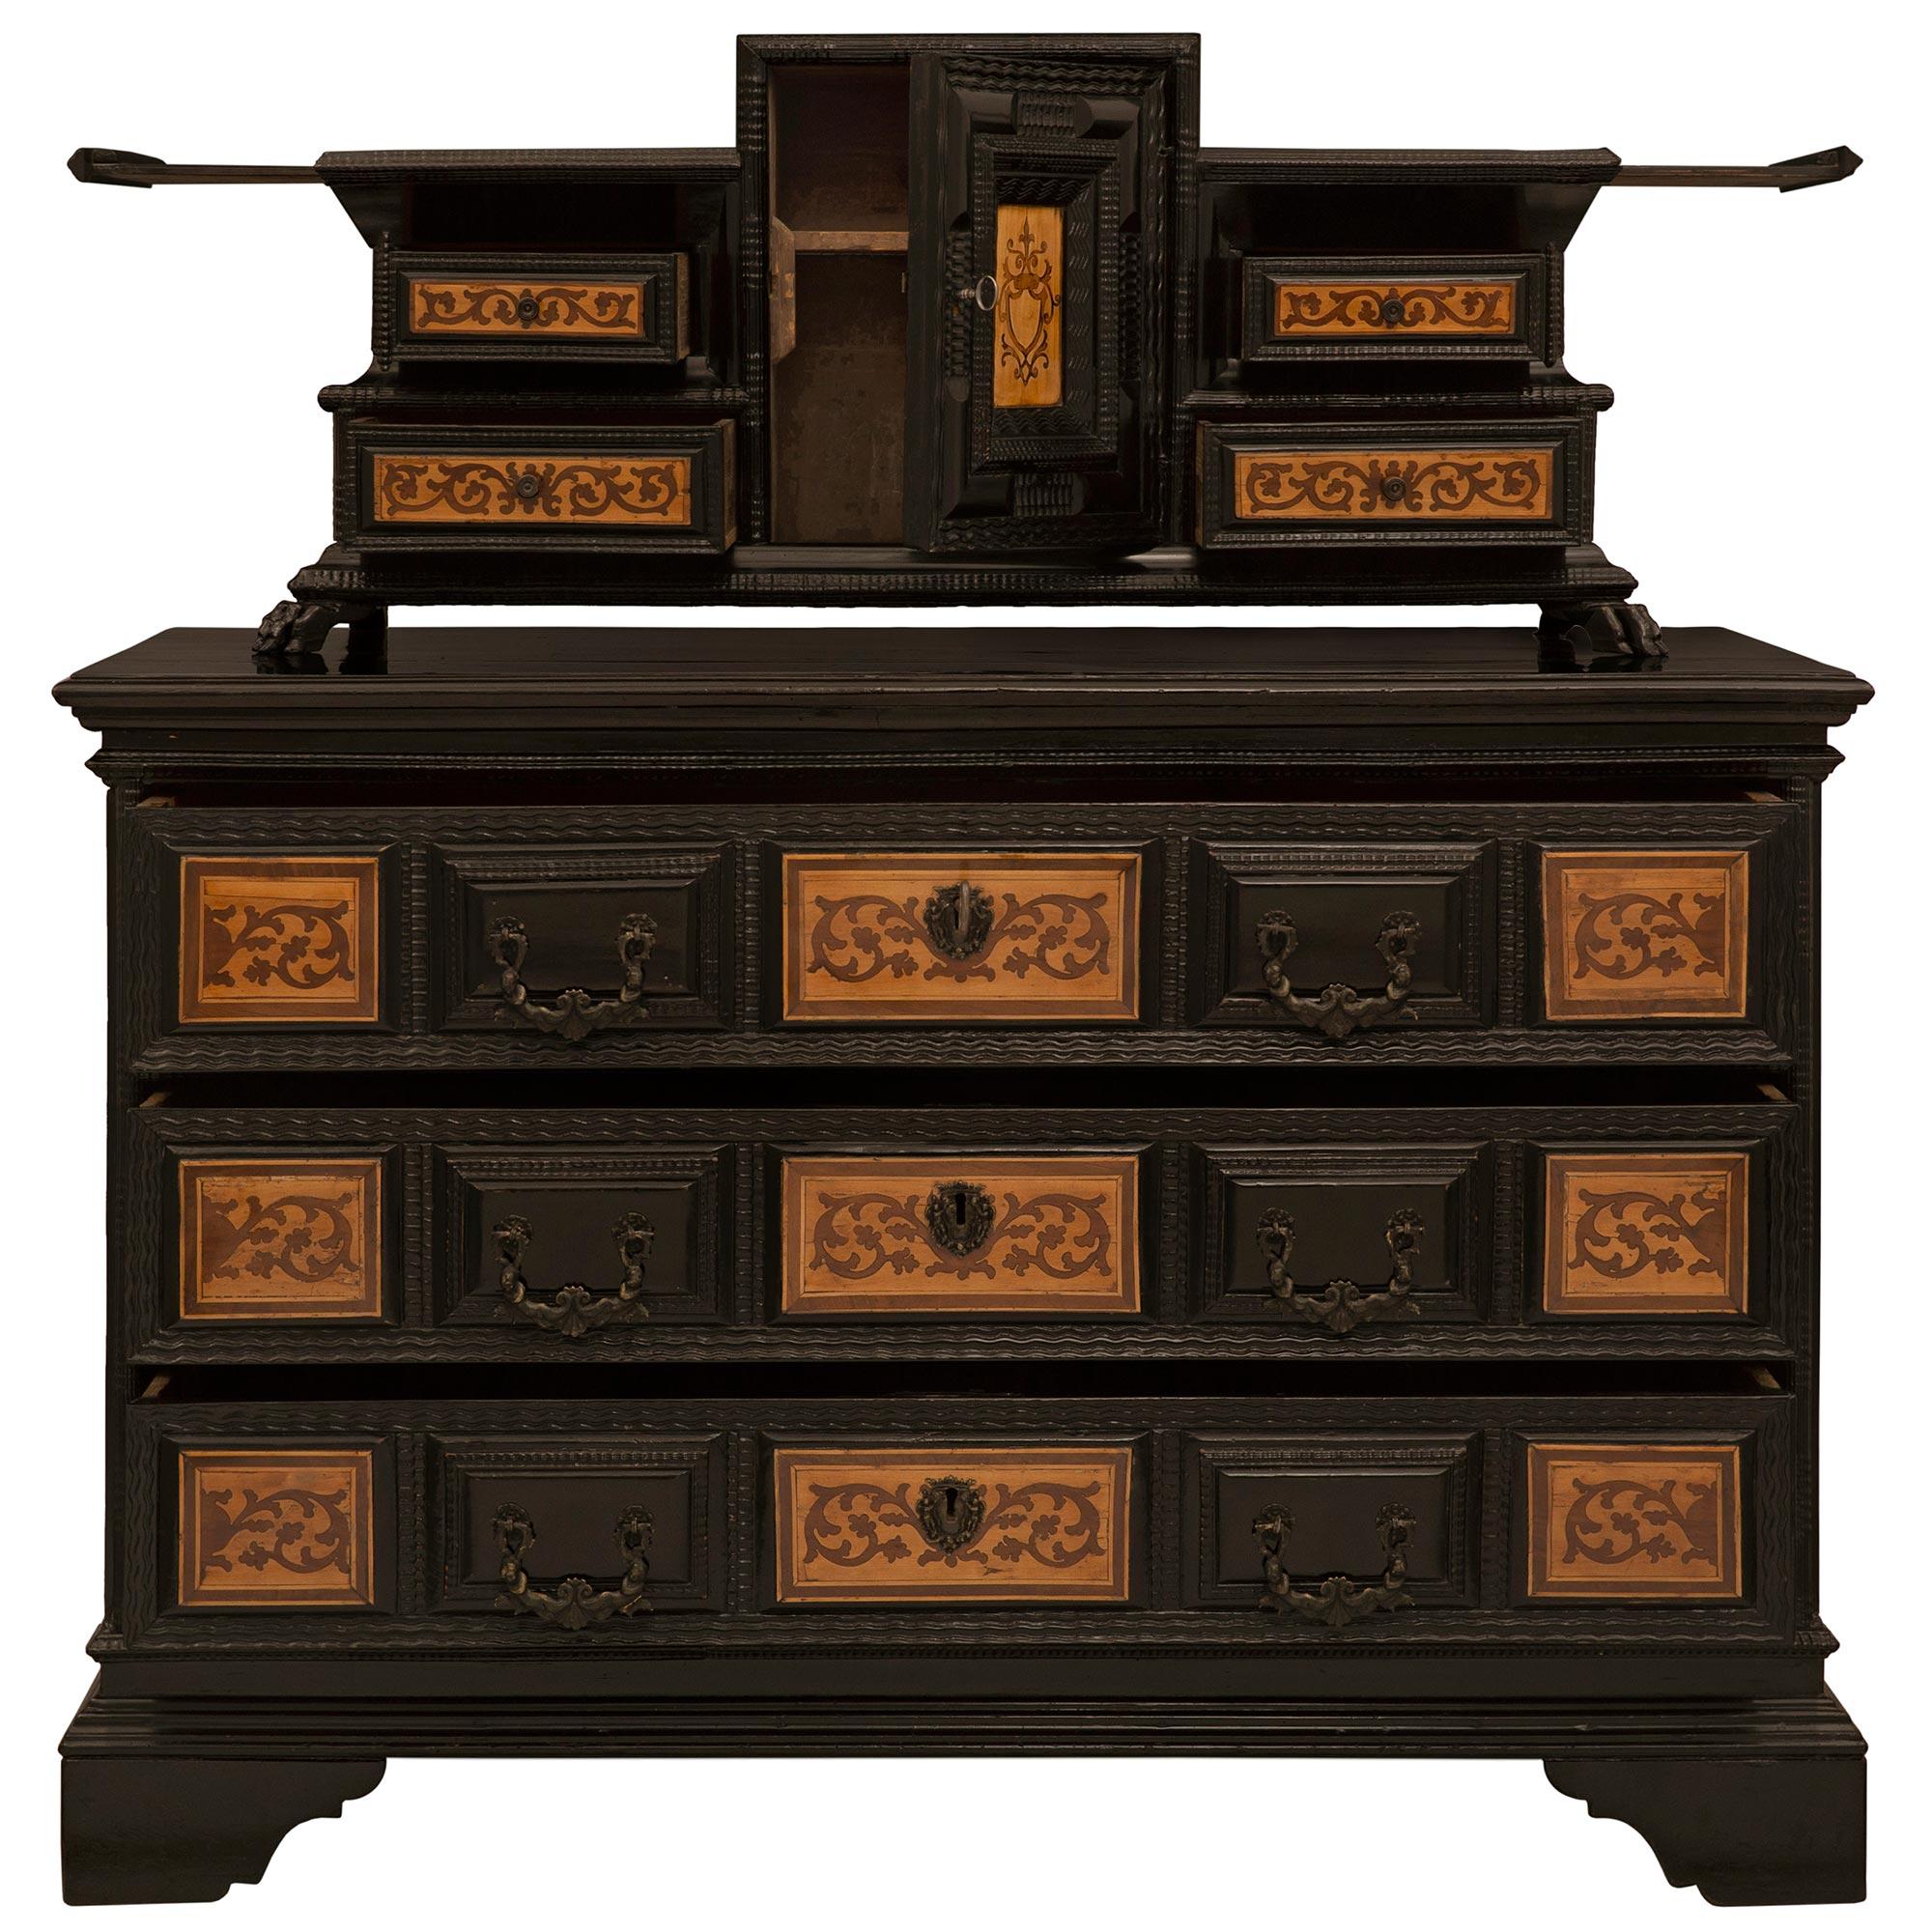 An extremely handsome Italian 17th century ebonized fruitwood, walnut, and tulipwood Baroque chest with its original hutch. The chest is raised by scalloped support below three impressive drawers. Each drawer displays exceptional carvings and